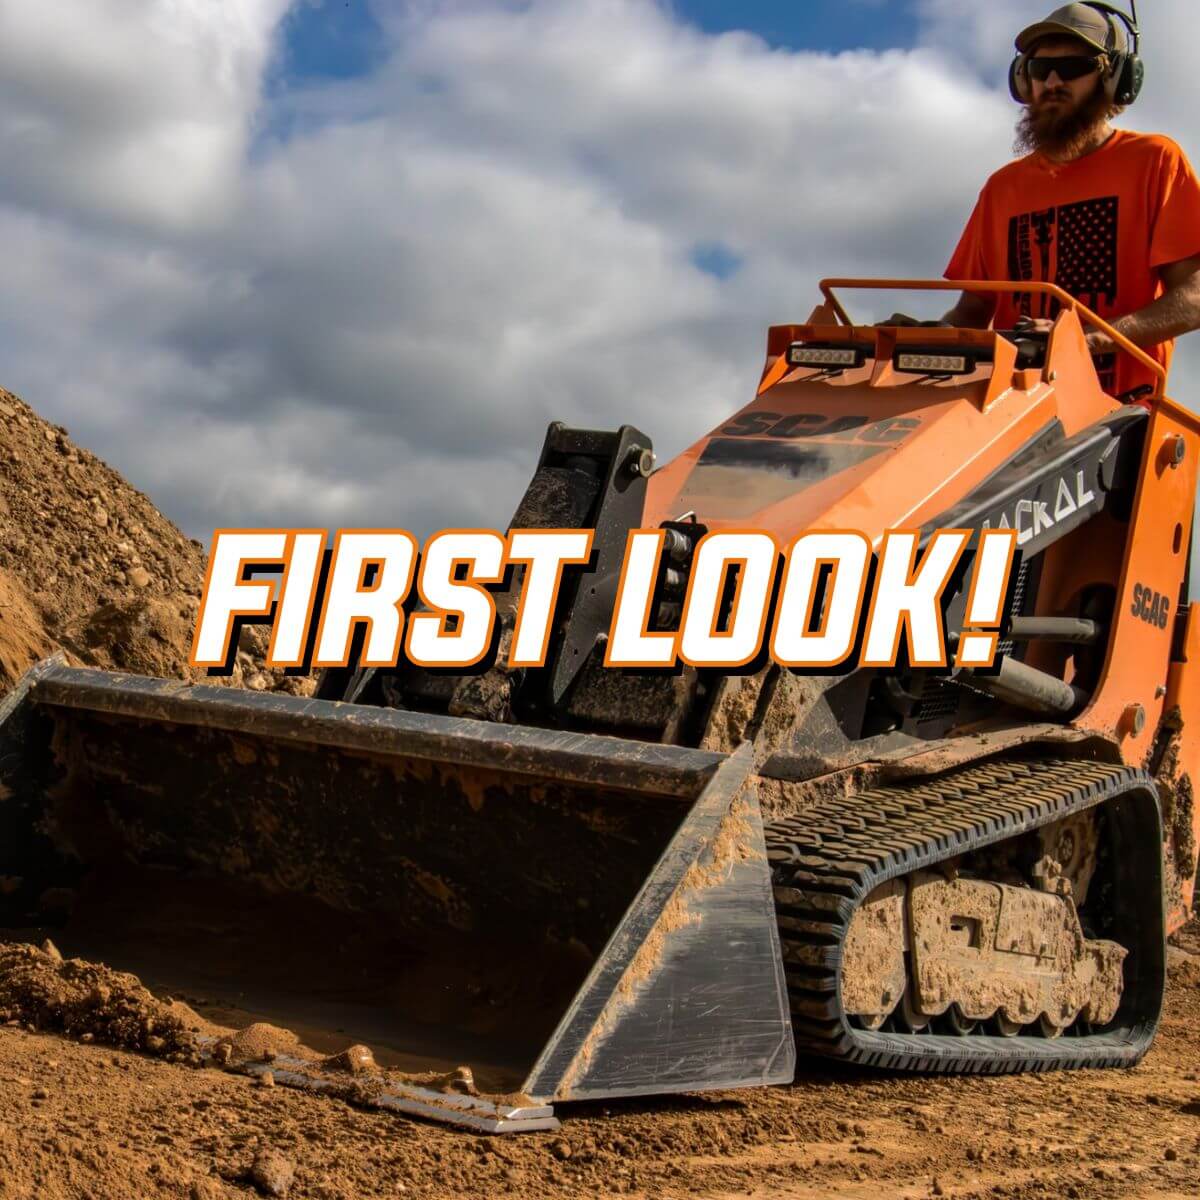 First Look: Scag Jackal Mini Tracked Skid Steer - Gilford Hardware & Outdoor Power Equipment